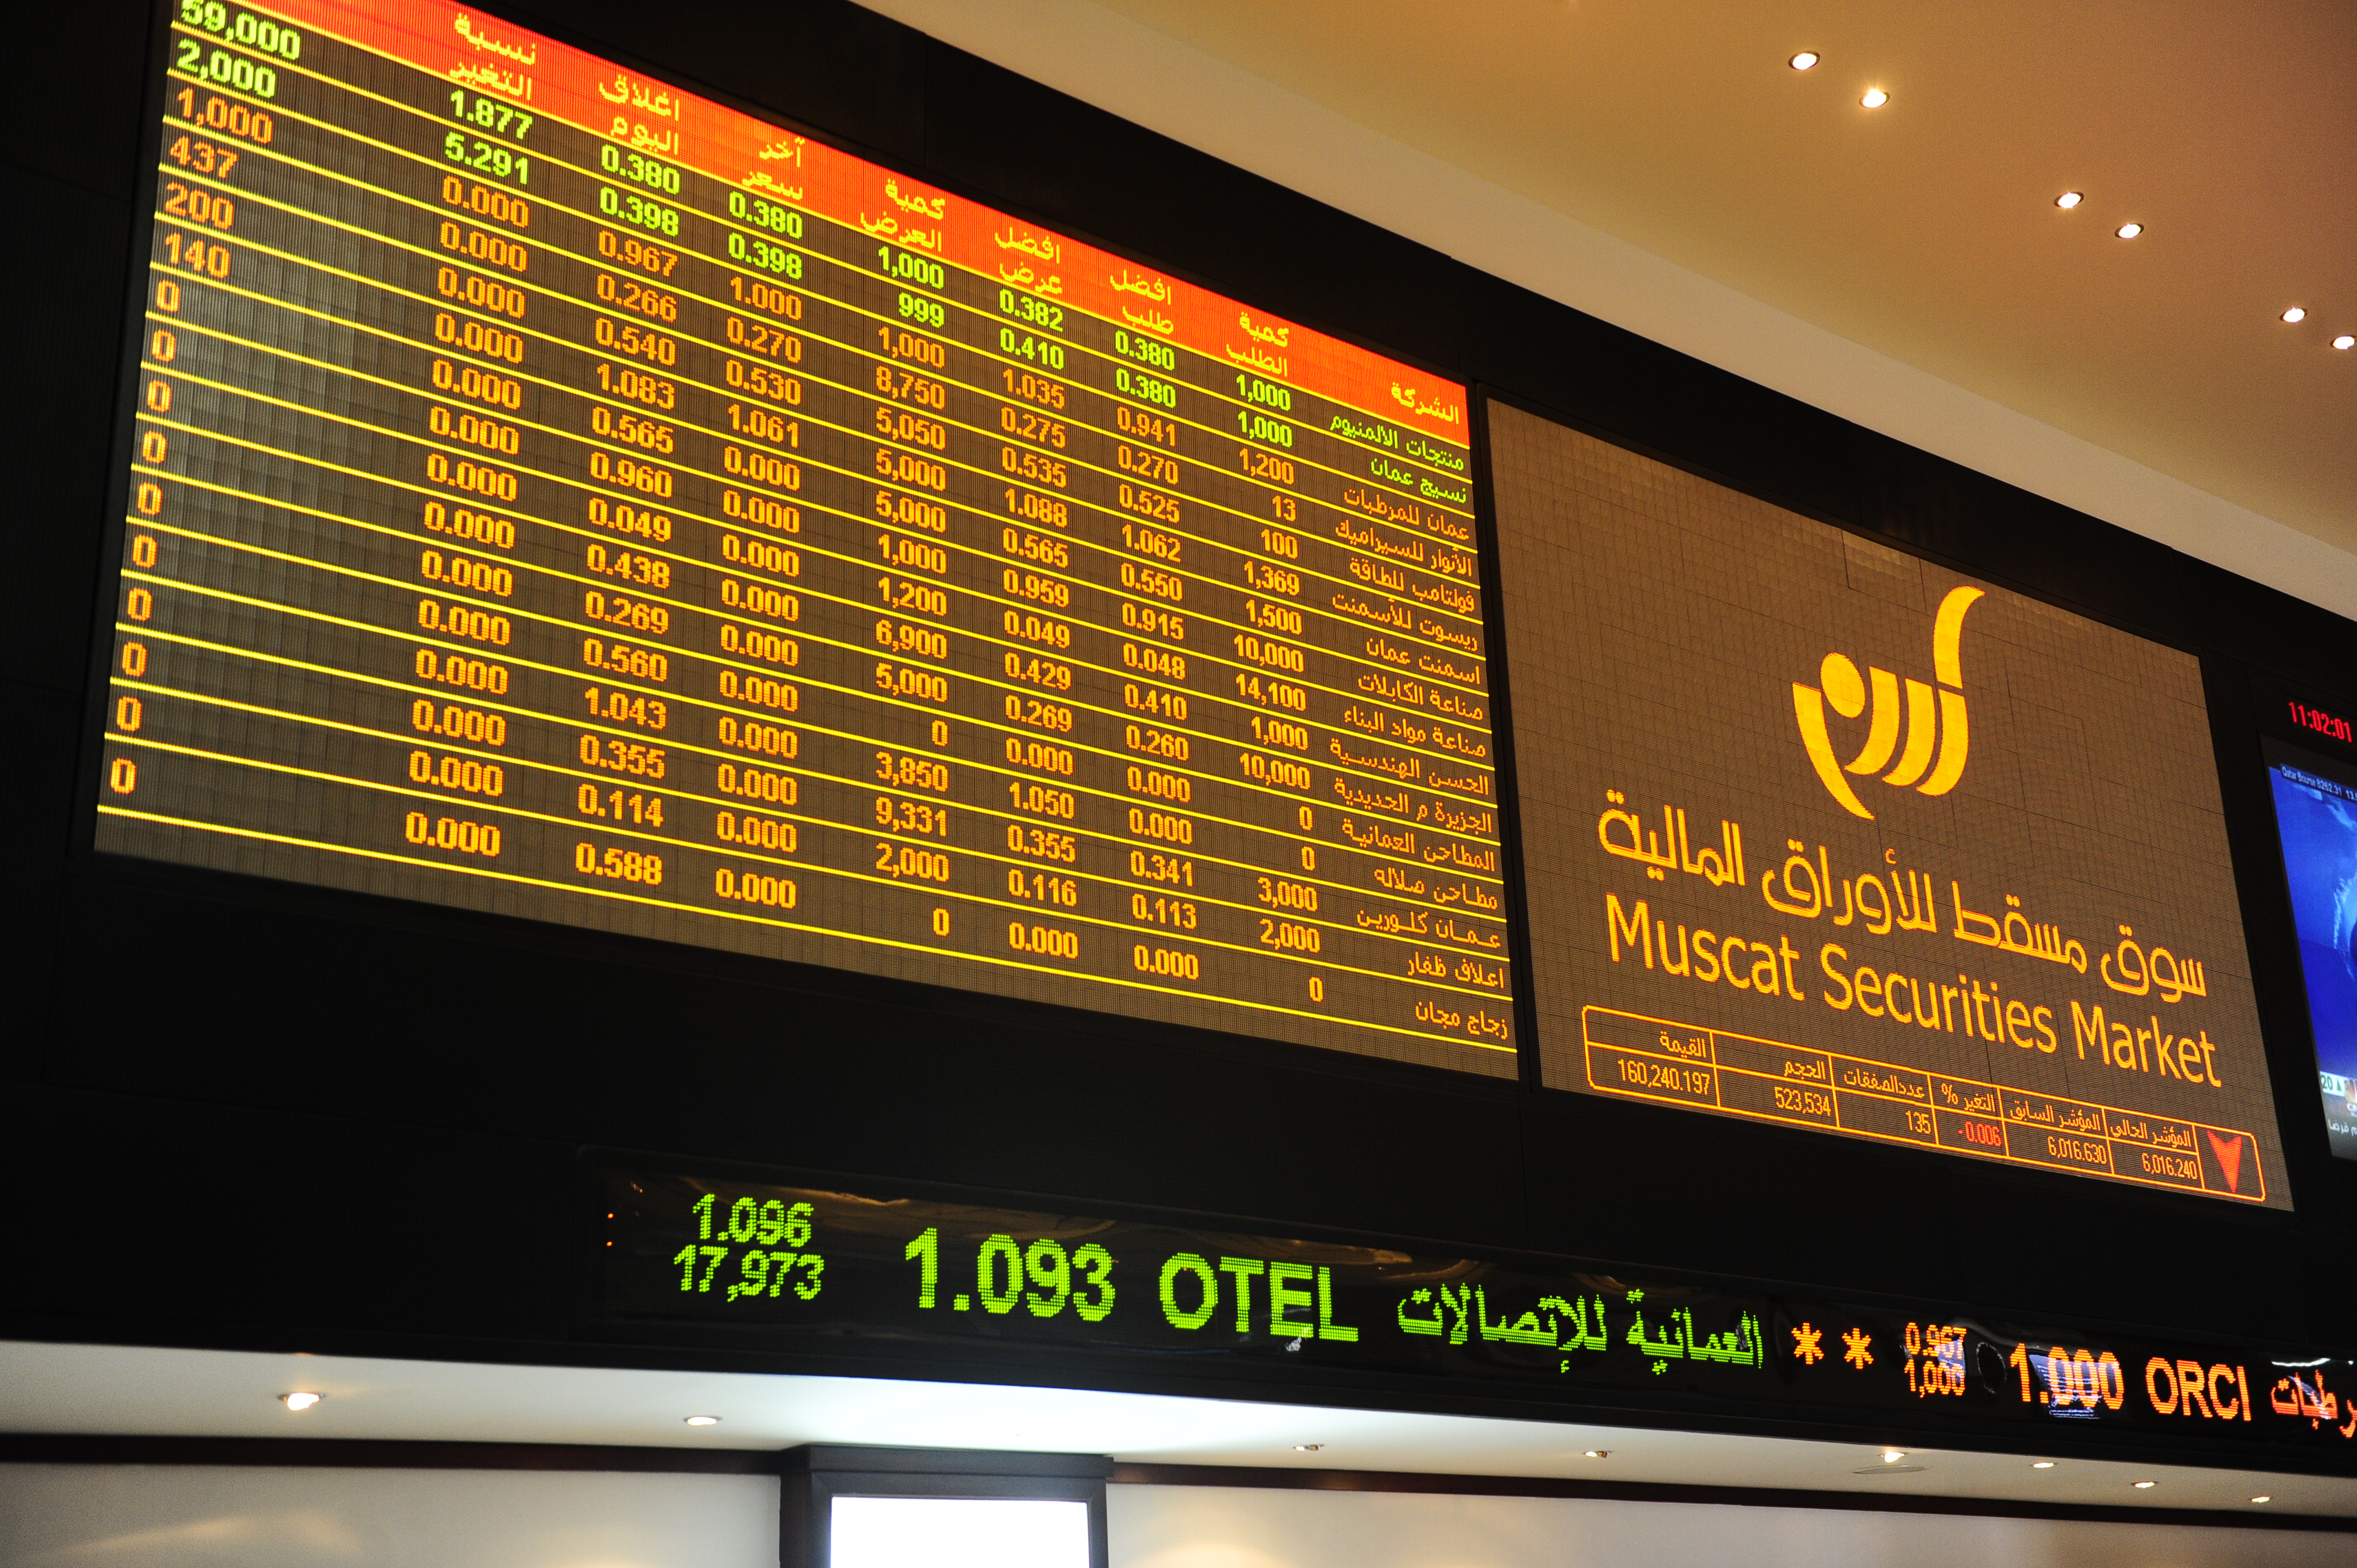 Heavy selling in banking shares drag Oman index lower